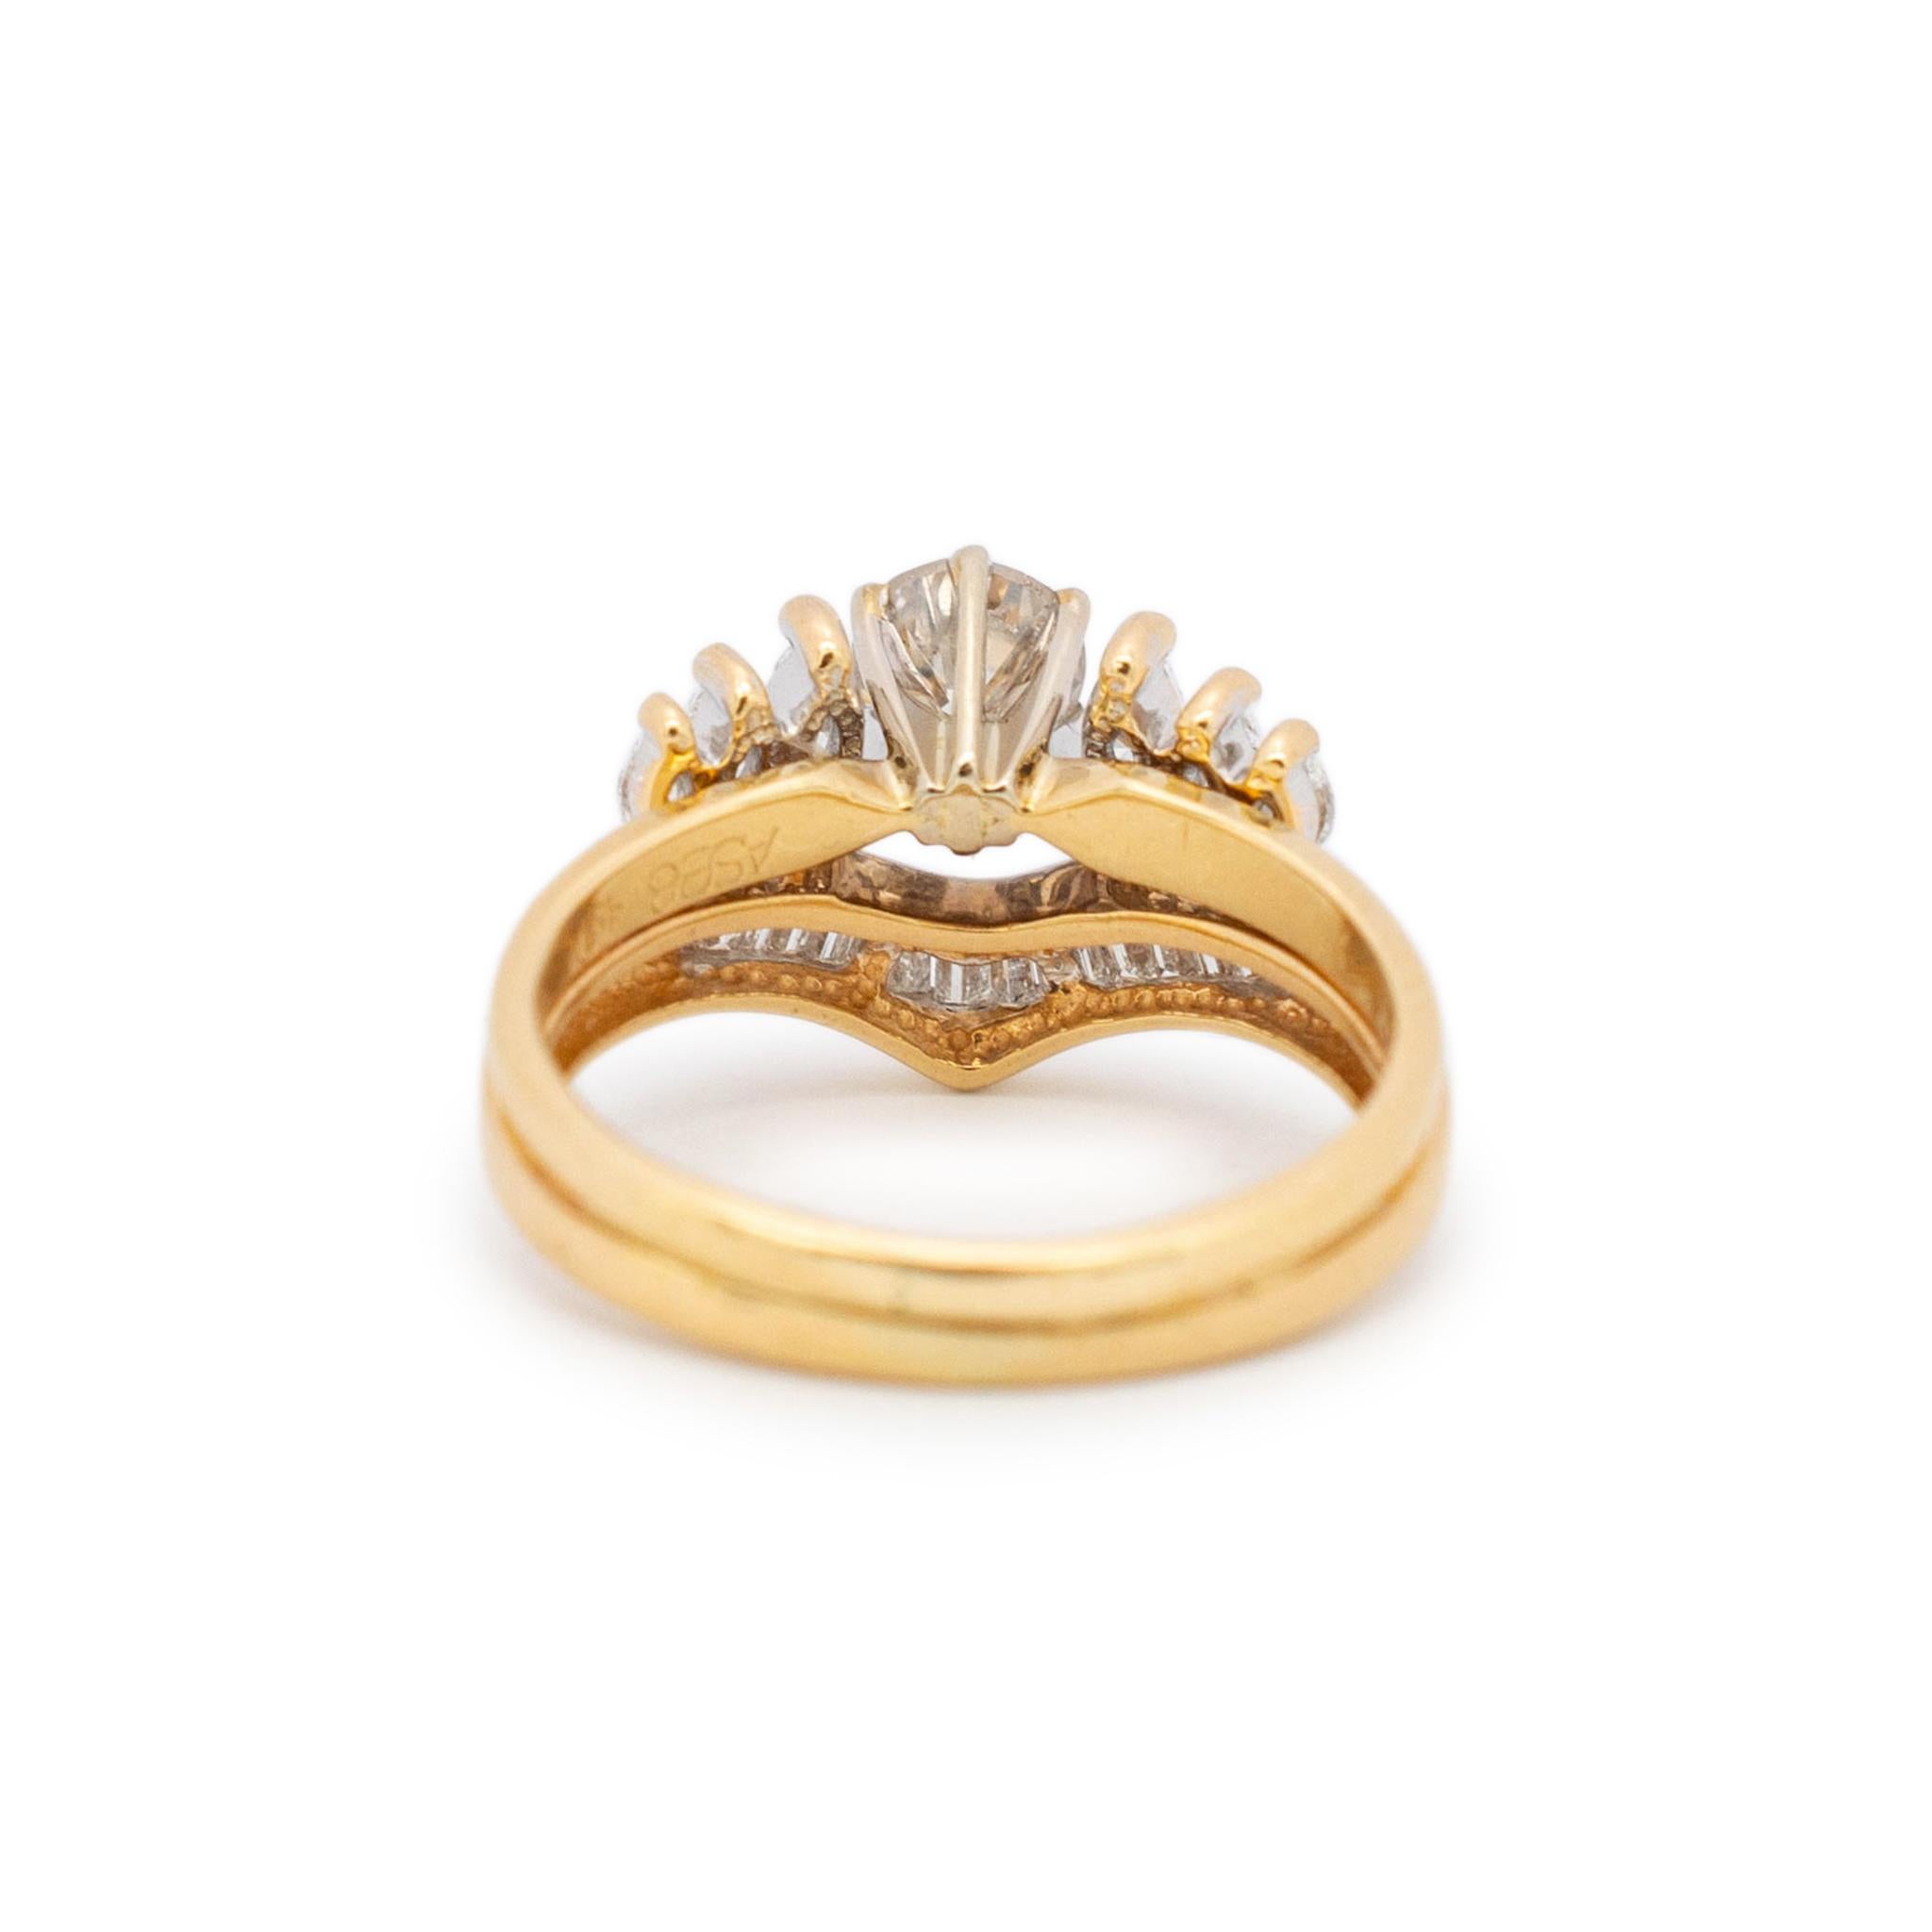 Ladies 14K Yellow Gold Diamond Stacked Chevron Engagement Ring In Excellent Condition For Sale In Houston, TX